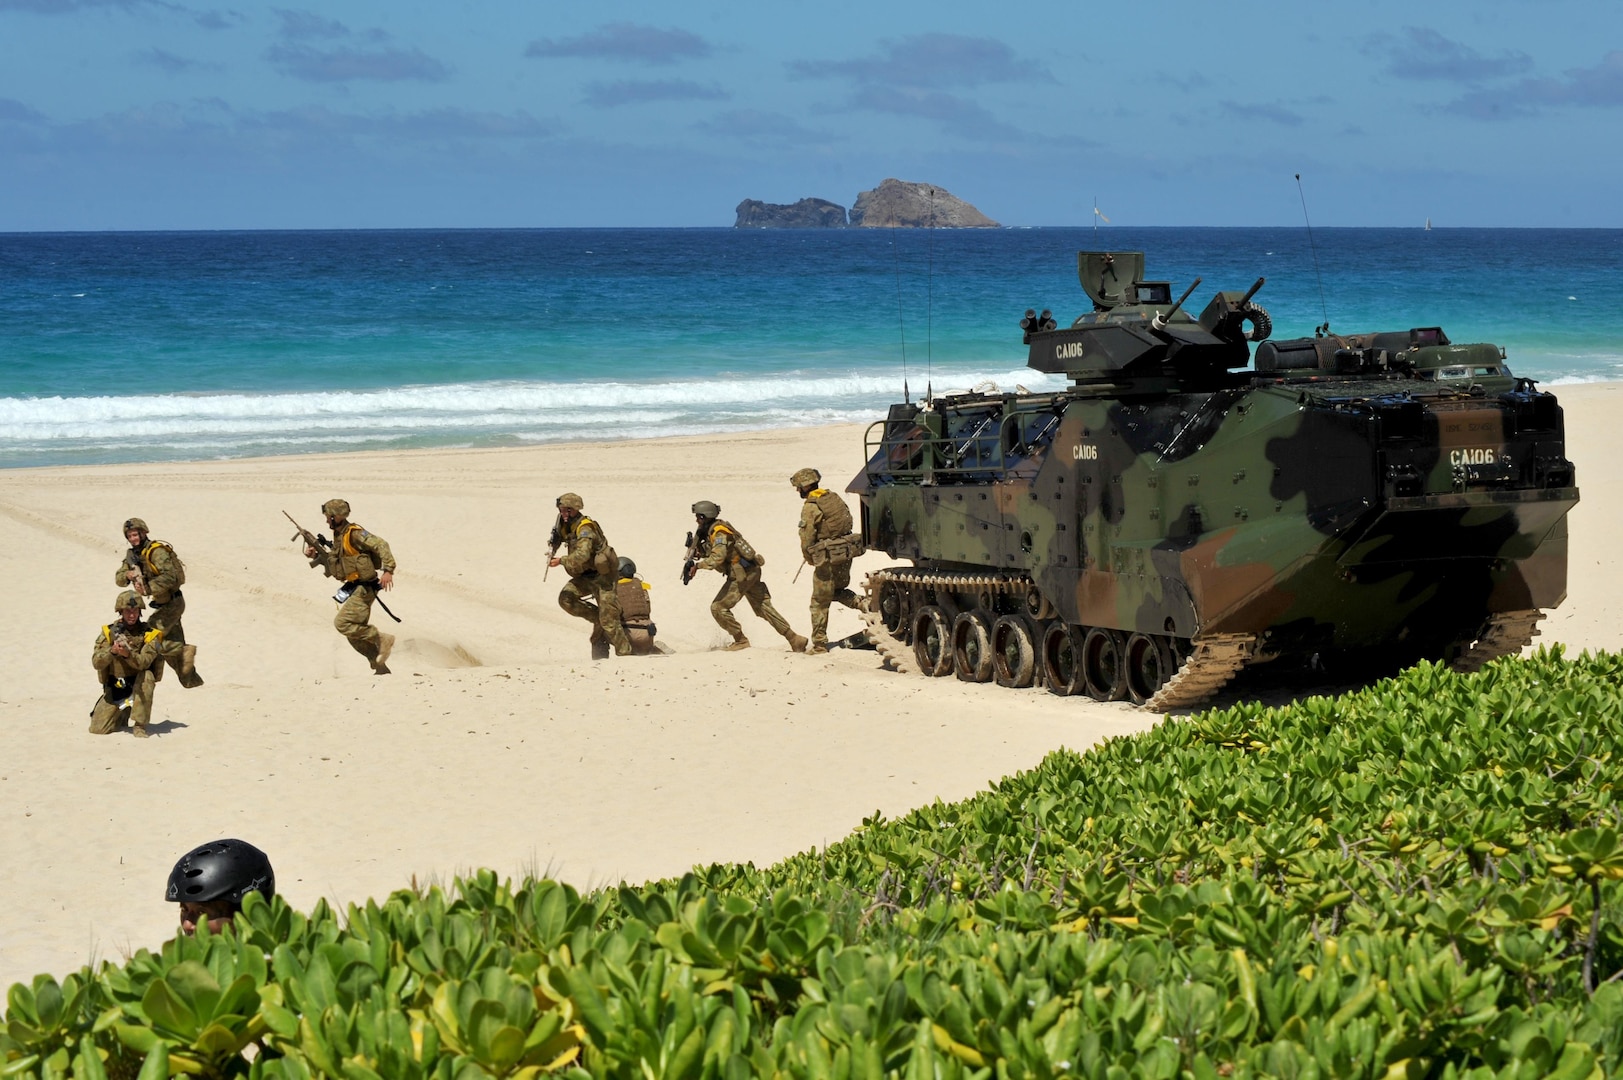 140728-N-UL721-192 MARINE CORPS BASE HAWAII (July 28, 2014) Royal Australian Navy sailors participate in a simulated beach assault during Rim of the Pacific (RIMPAC) Exercise 2014. Twenty-two nations, 49 ships, six submarines, more than 200 aircraft and 25,000 personnel are participating in RIMPAC from June 26 to Aug. 1, in and around the Hawaiian Islands and Southern California. The world's largest maritime exercise, RIMPAC provides a unique training opportunity that helps participants foster and sustain the cooperative relationships that are critical to ensuring the safety of sea lanes and security on the world's oceans. RIMPAC 2014 is the 24th exercise in the series that began in 1971. (U.S. Navy photo by Mass Communication Specialist 2nd Class Corey T. Jones/Released) 